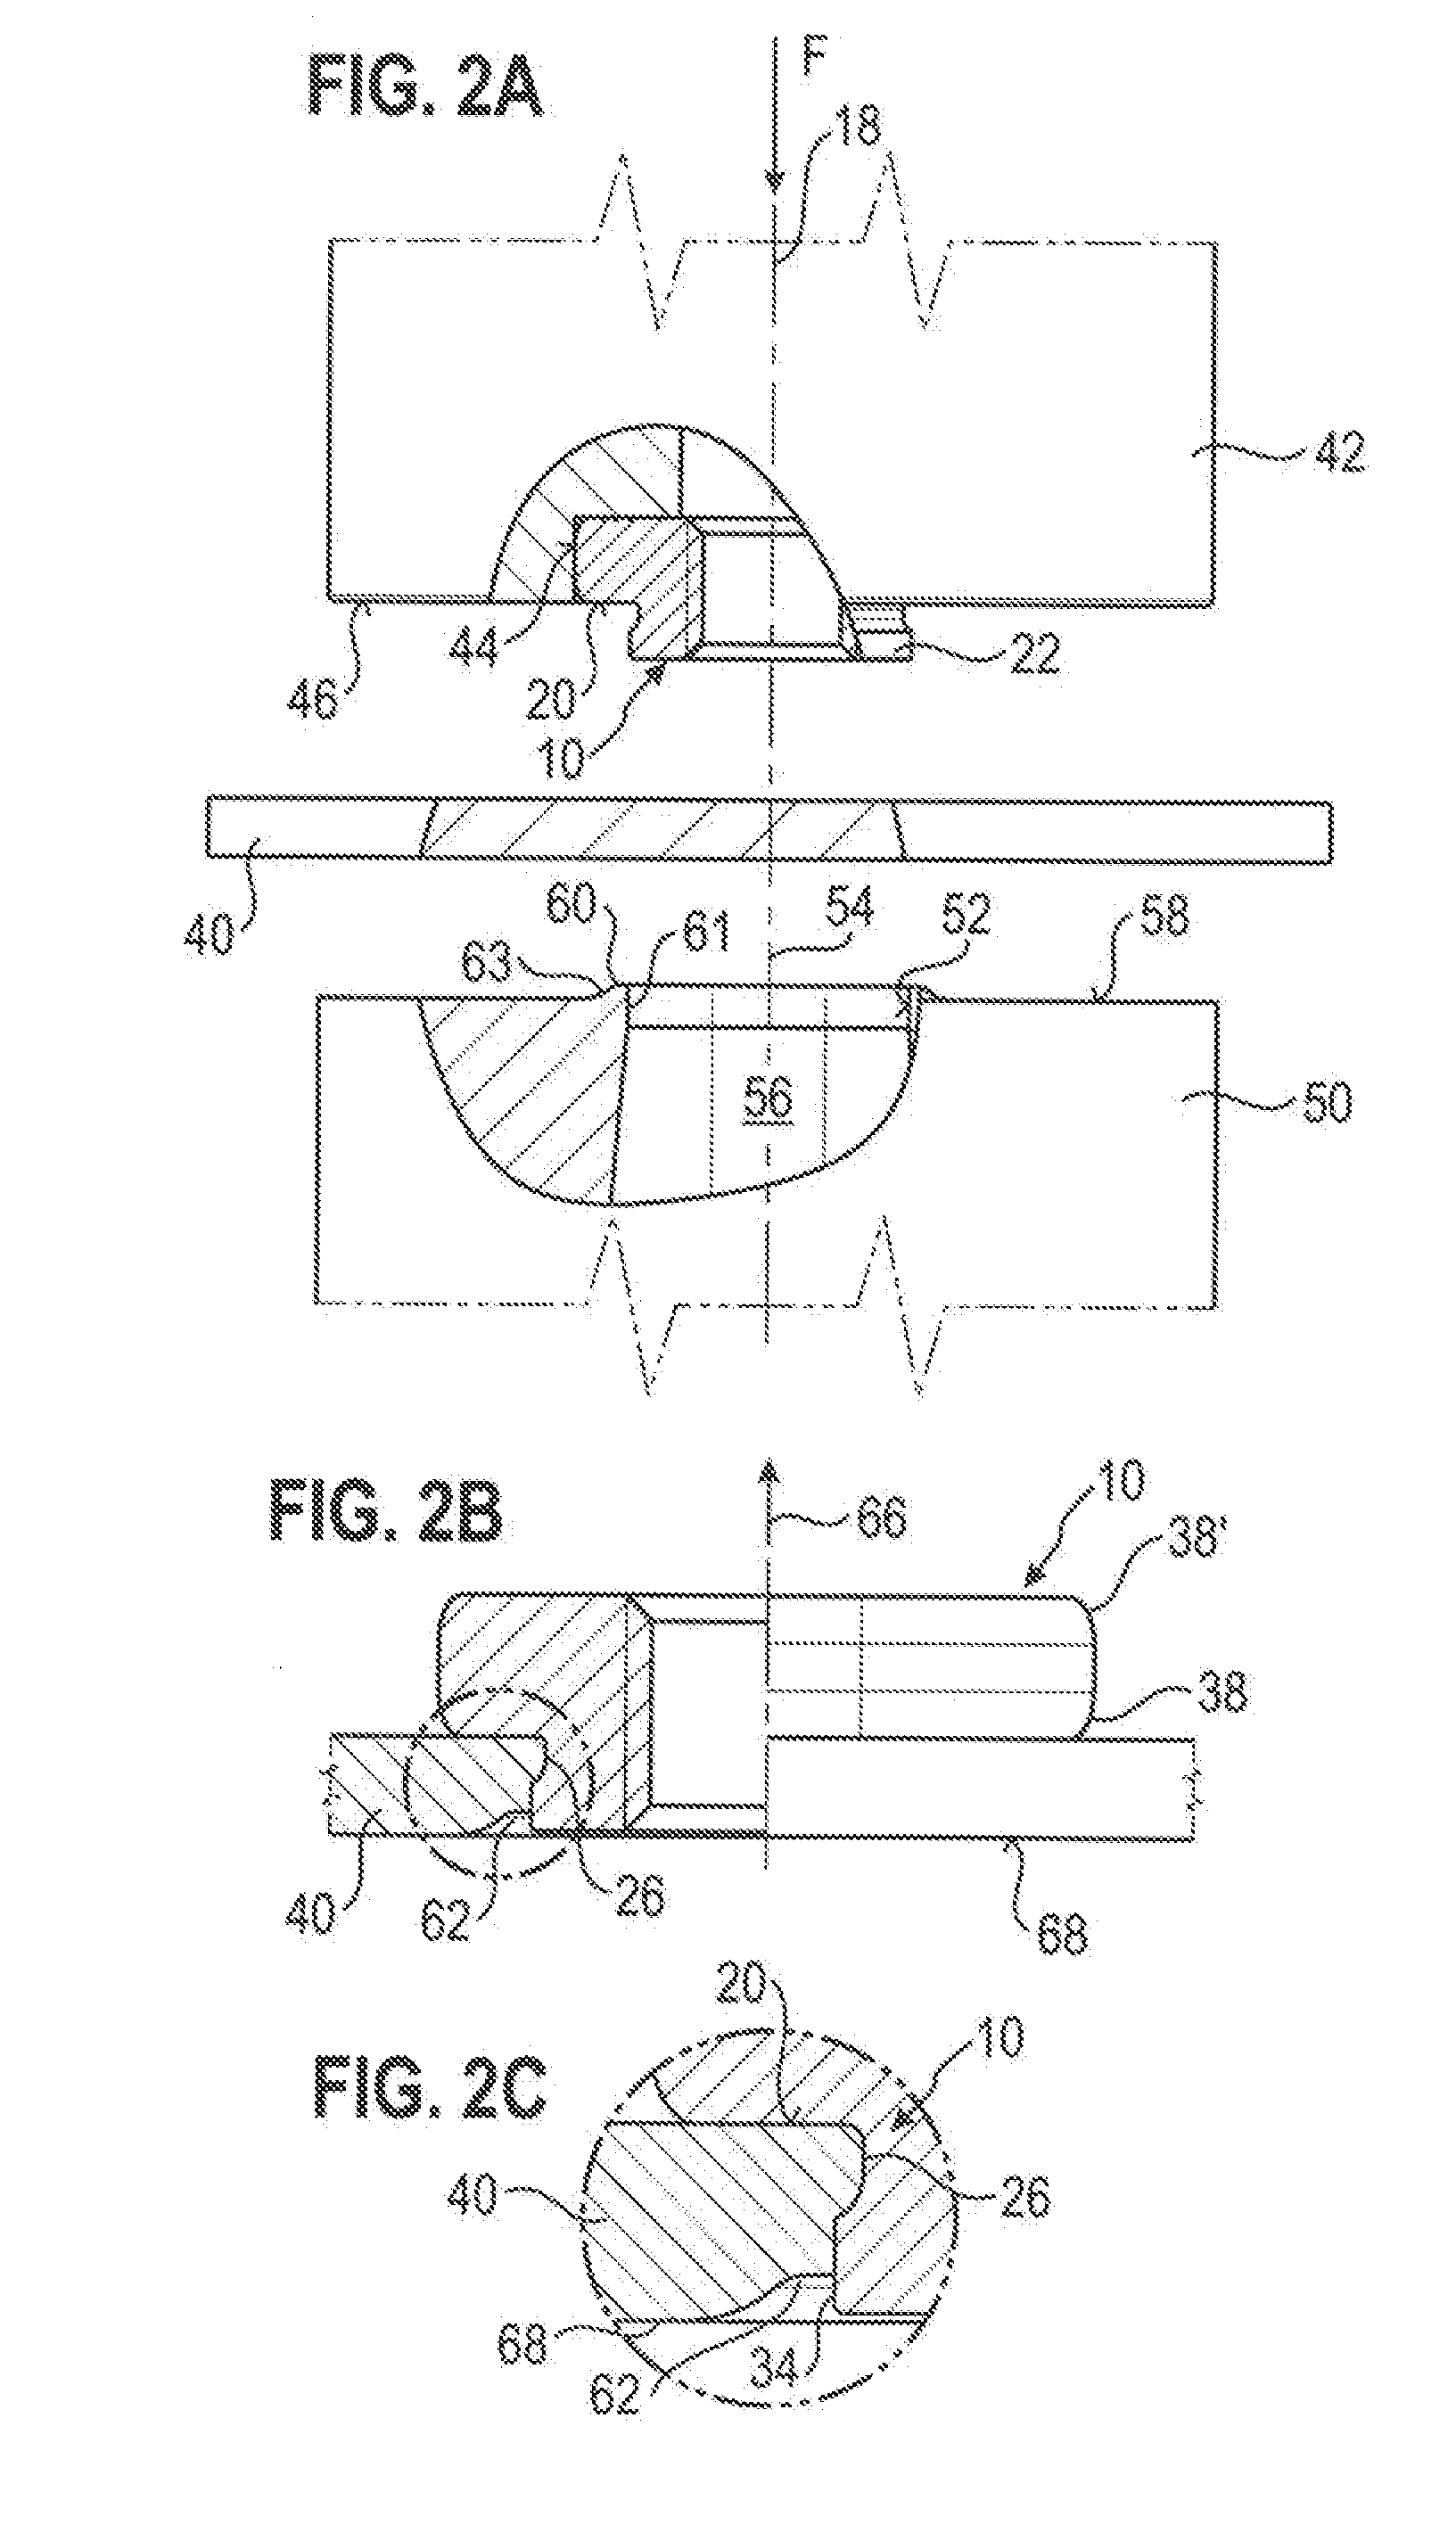 Self-piercing nut element and component assembly consisting of the nut element and a sheet metal part